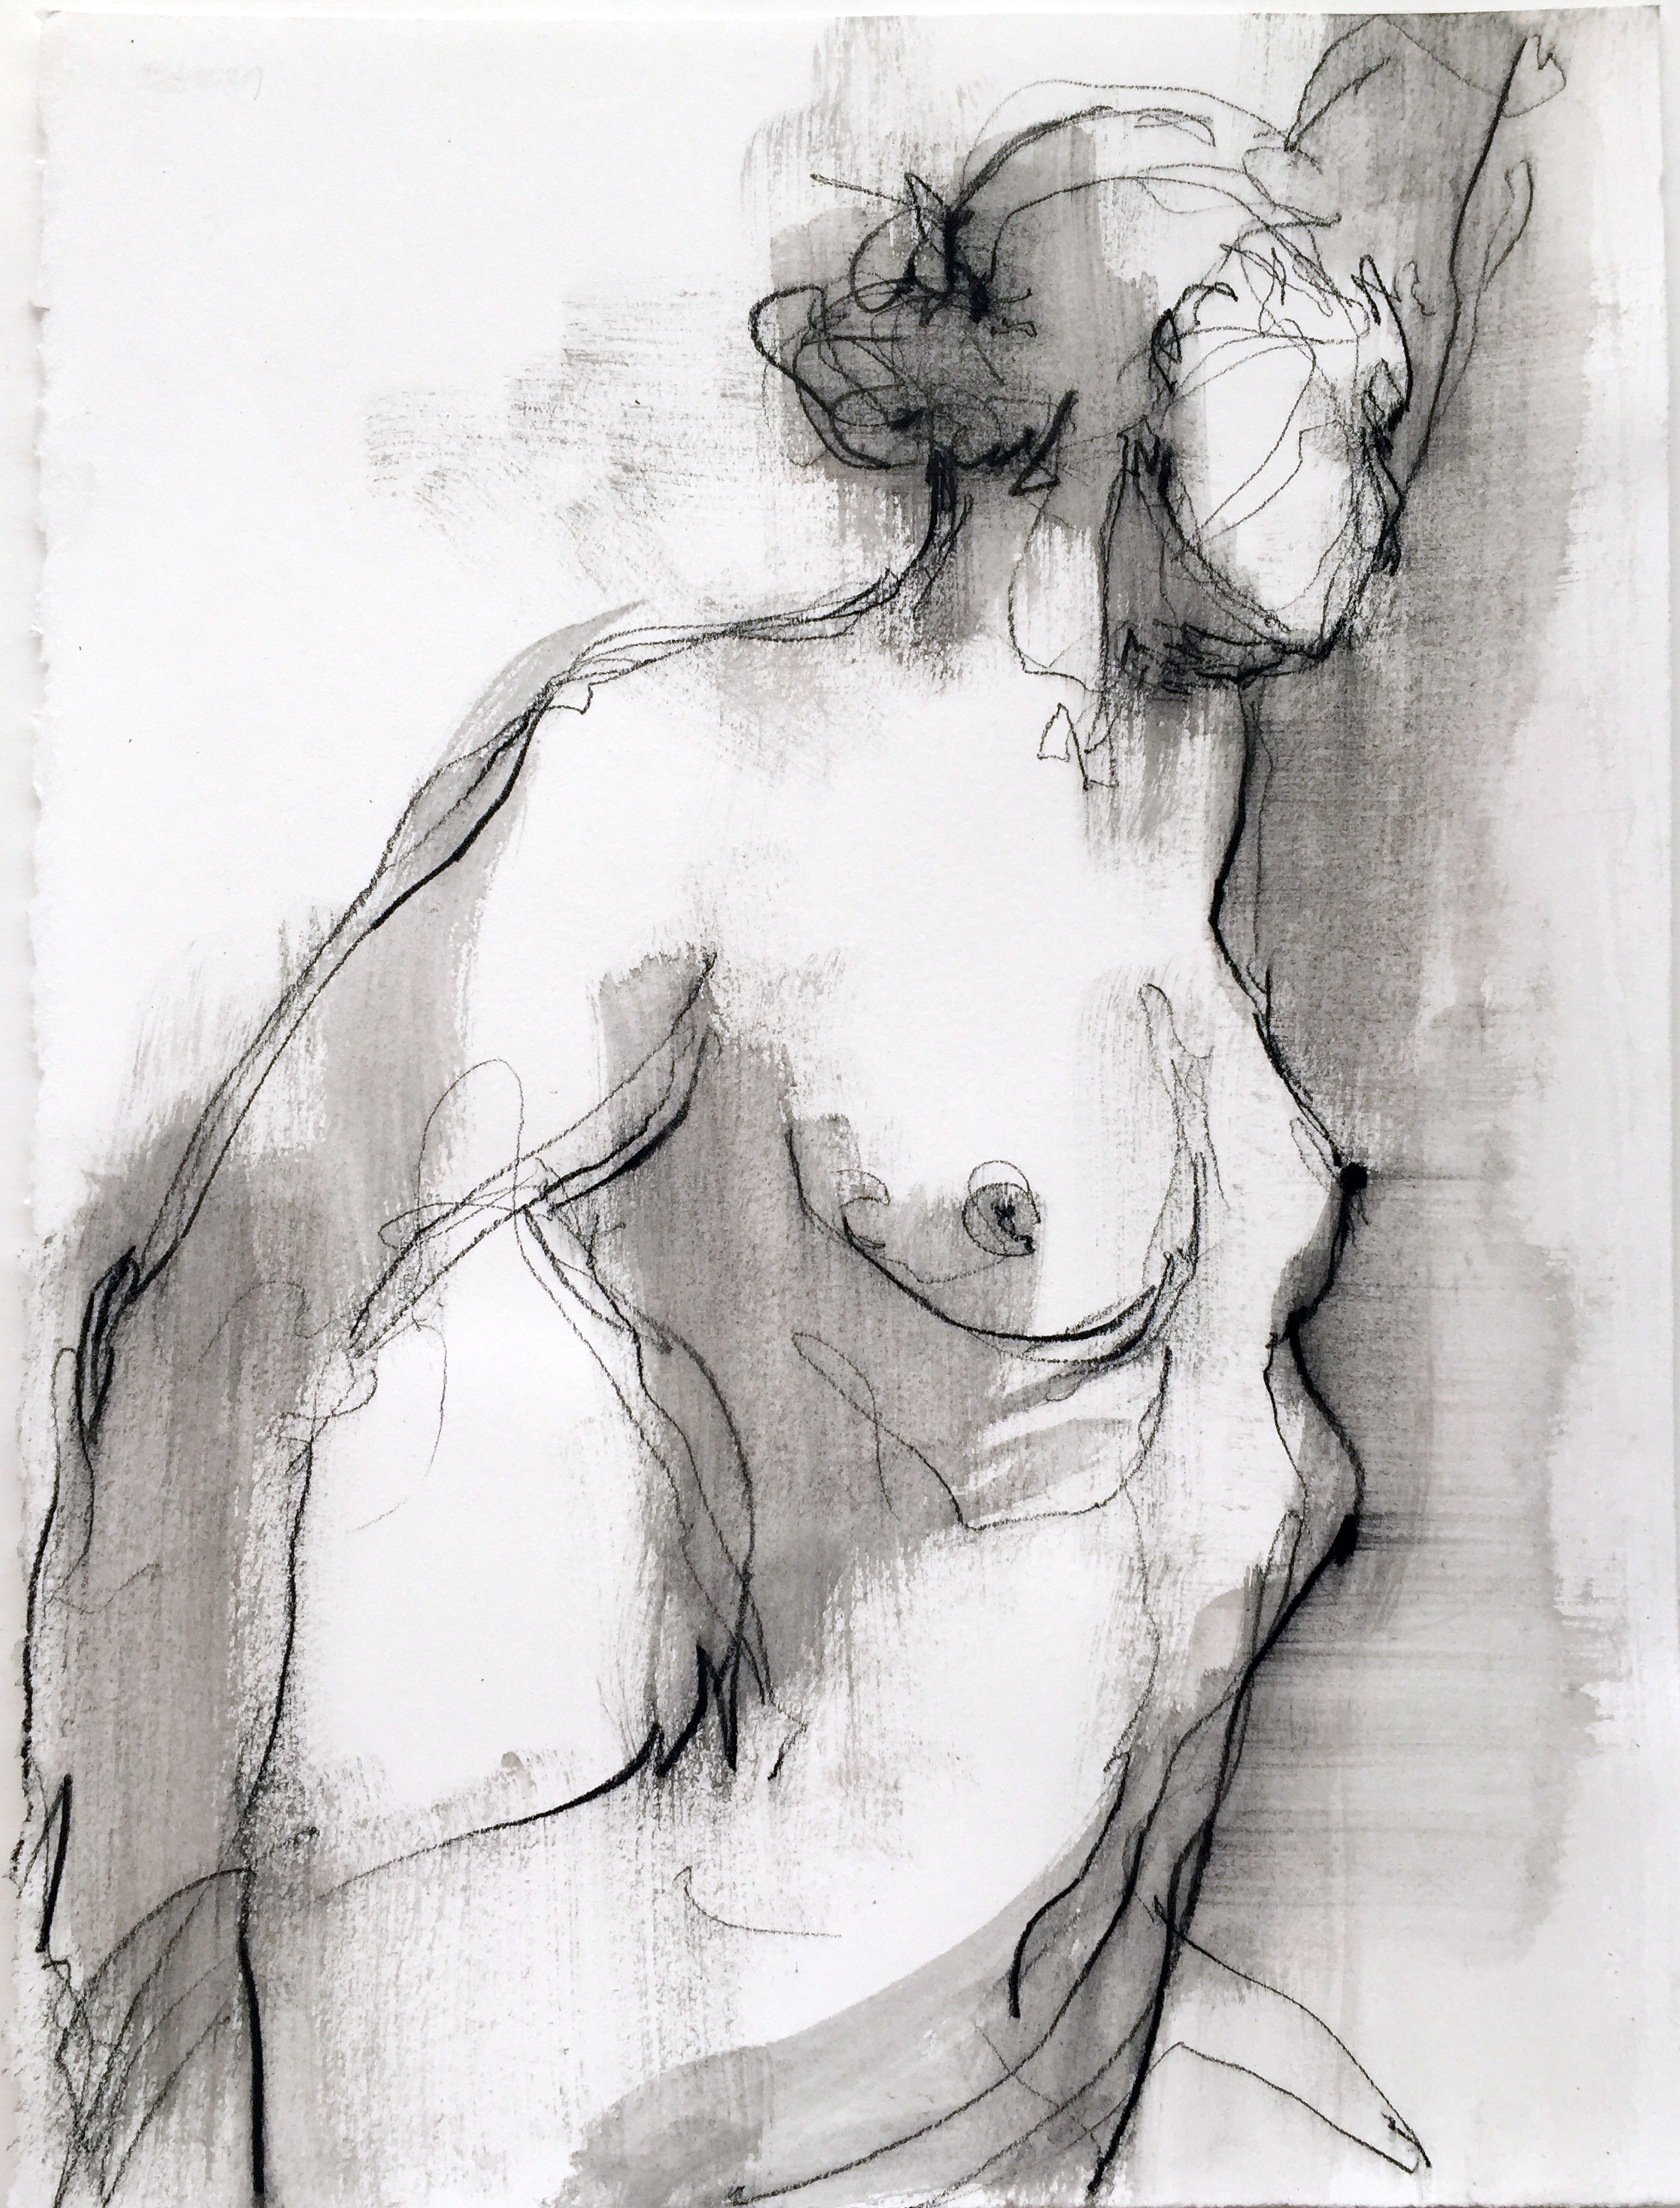   Nude 16  2016 Watercrayon on paper 12" x 9" 